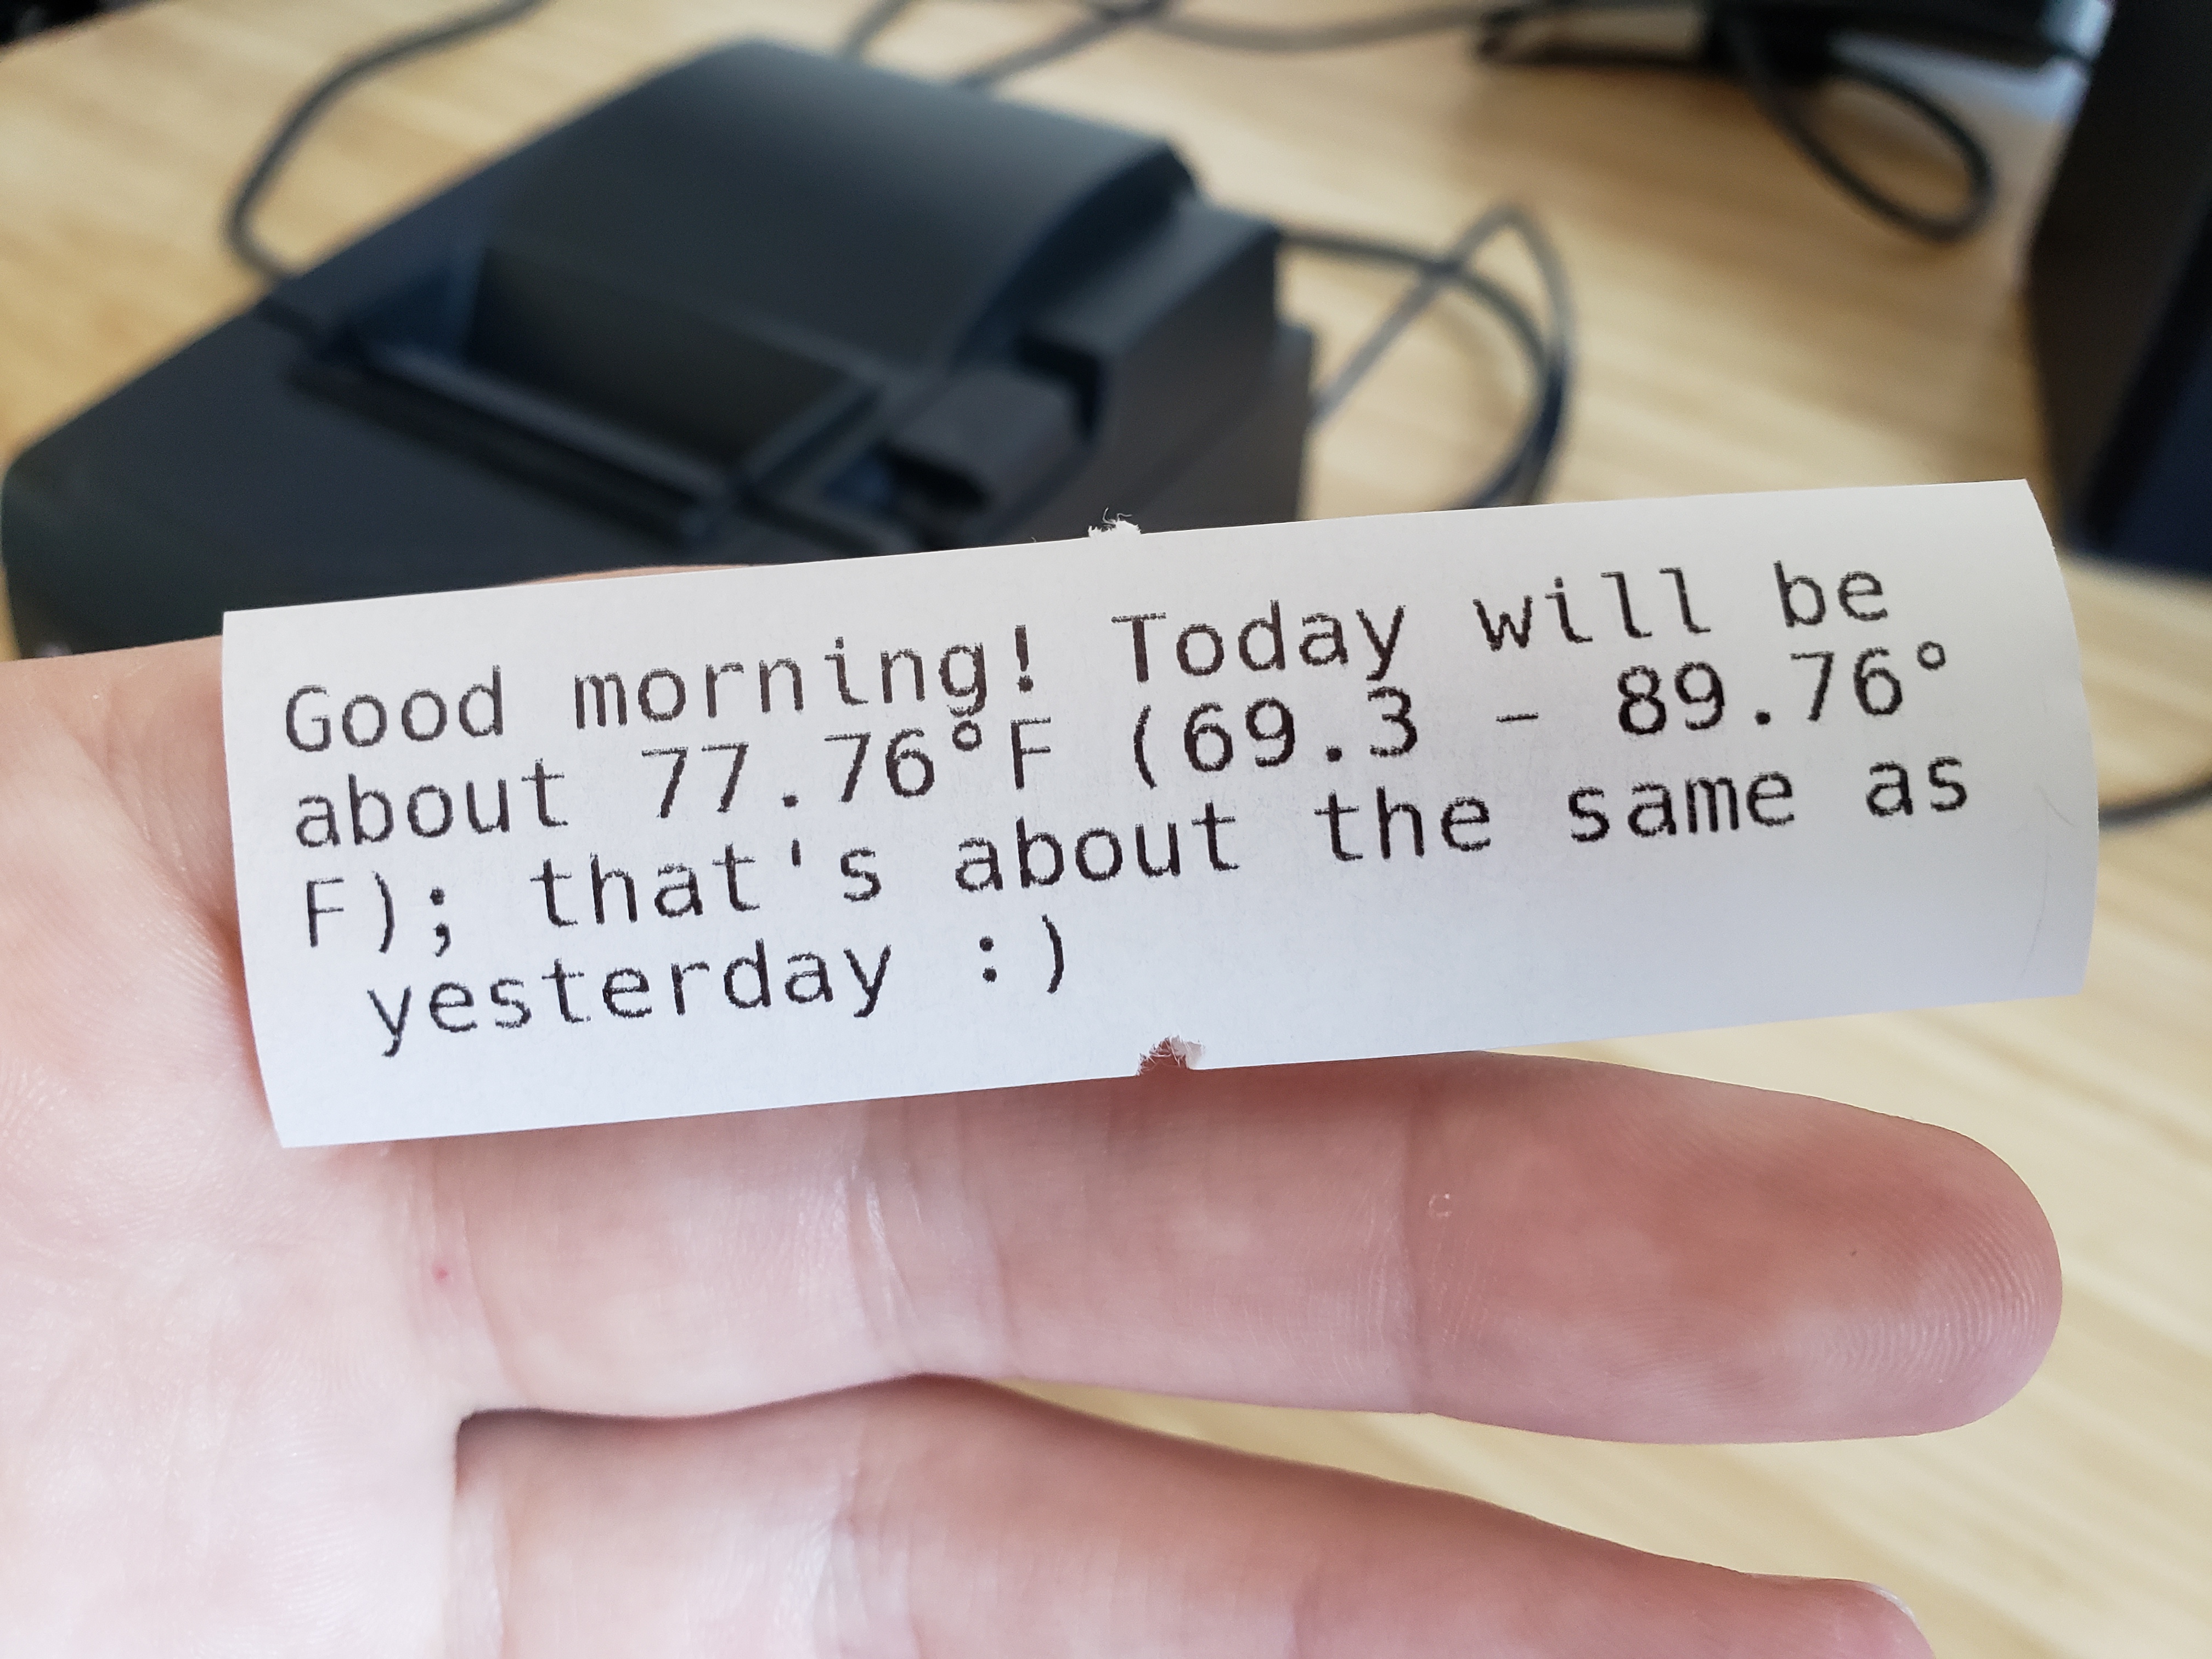 Me holding a printed receipt in my hand, which reads "Good morning! Today will be about 77.76°F (69.3 - 89.76°F); that's about the same as yesterday :)